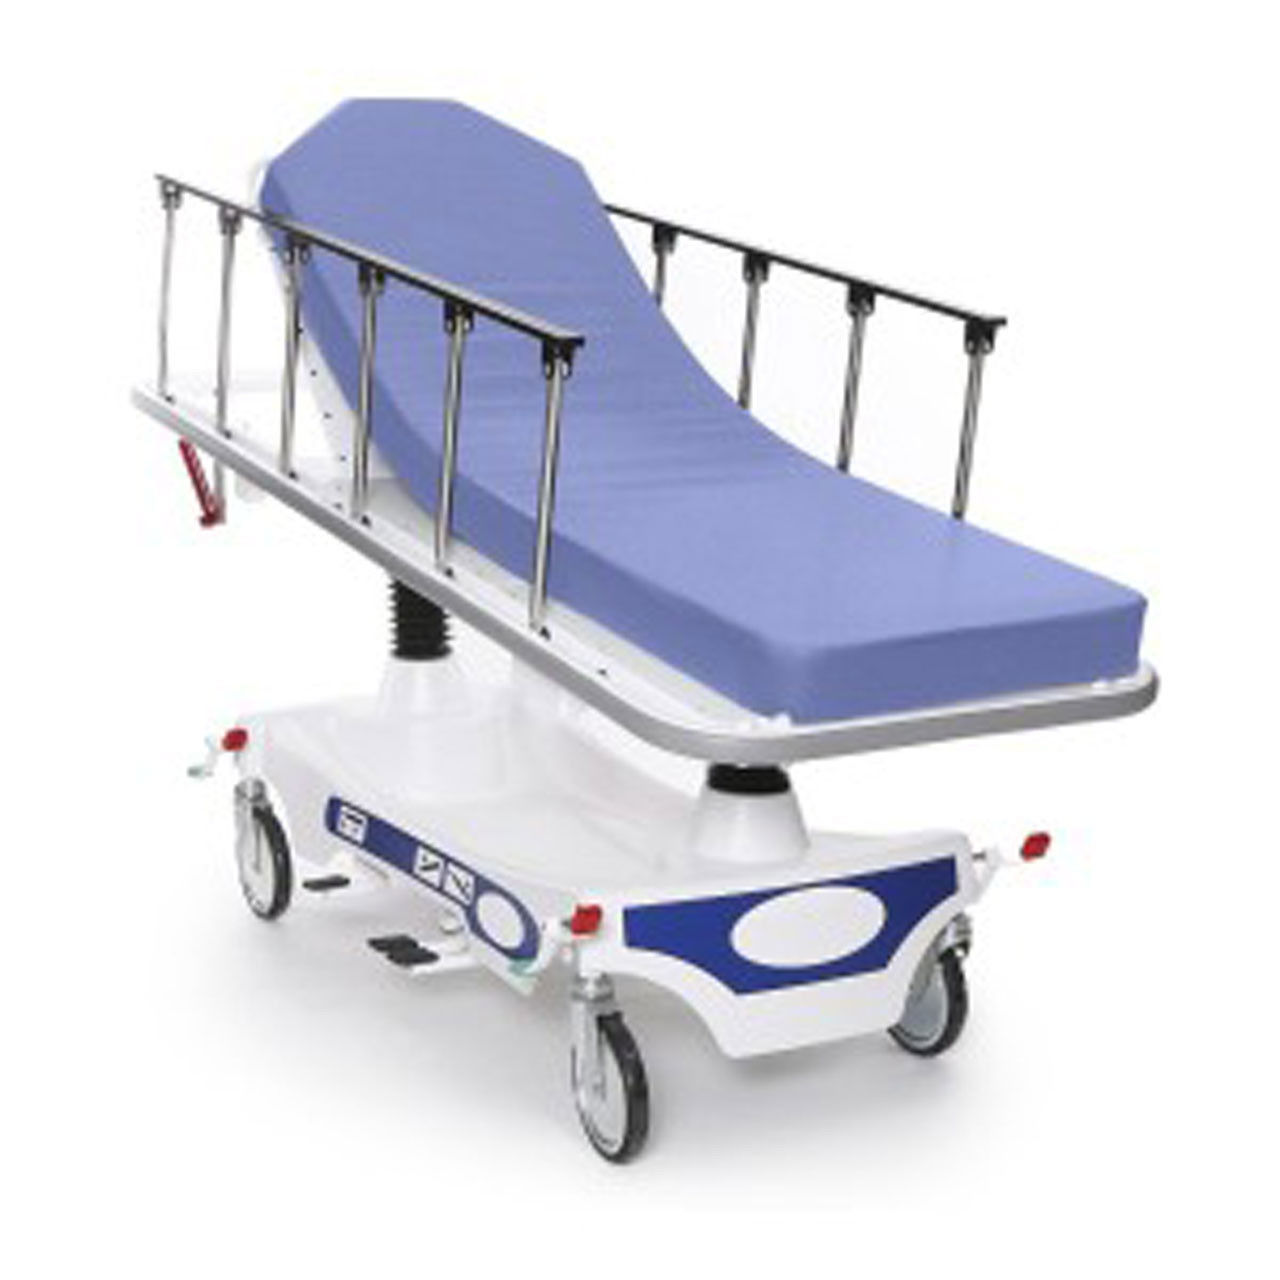 What is the design of these stretcher sheets?